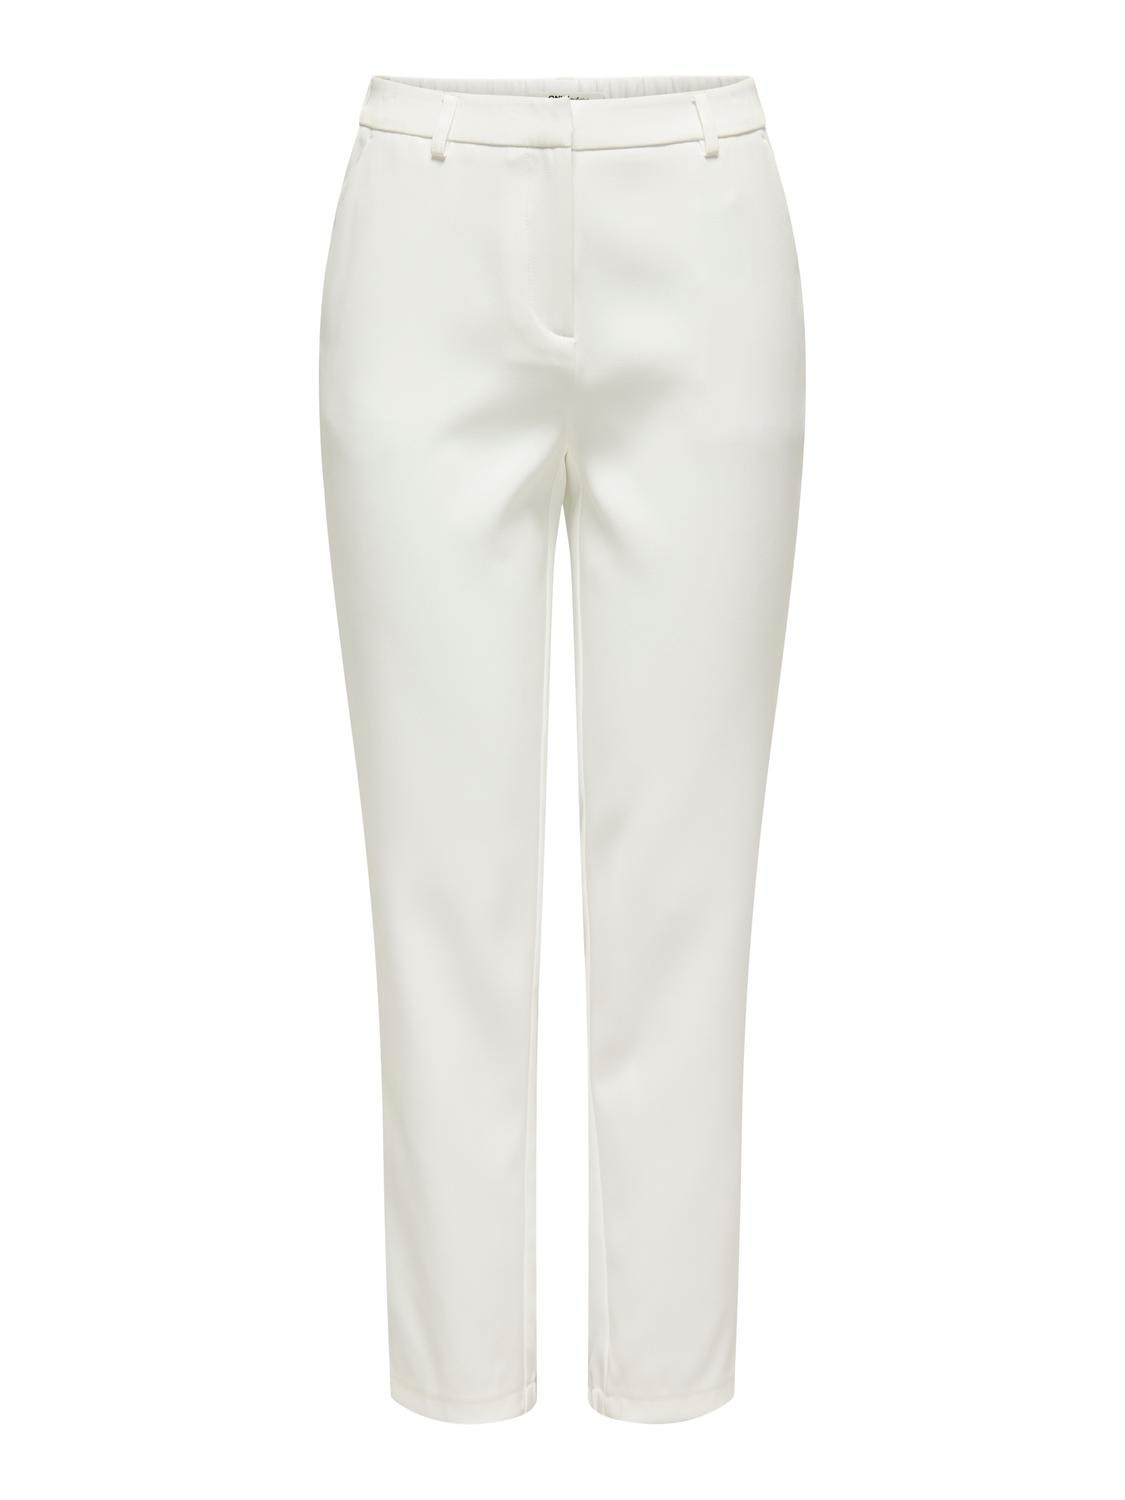 ONLY Trousers with mid waist -Bright White - 15311117